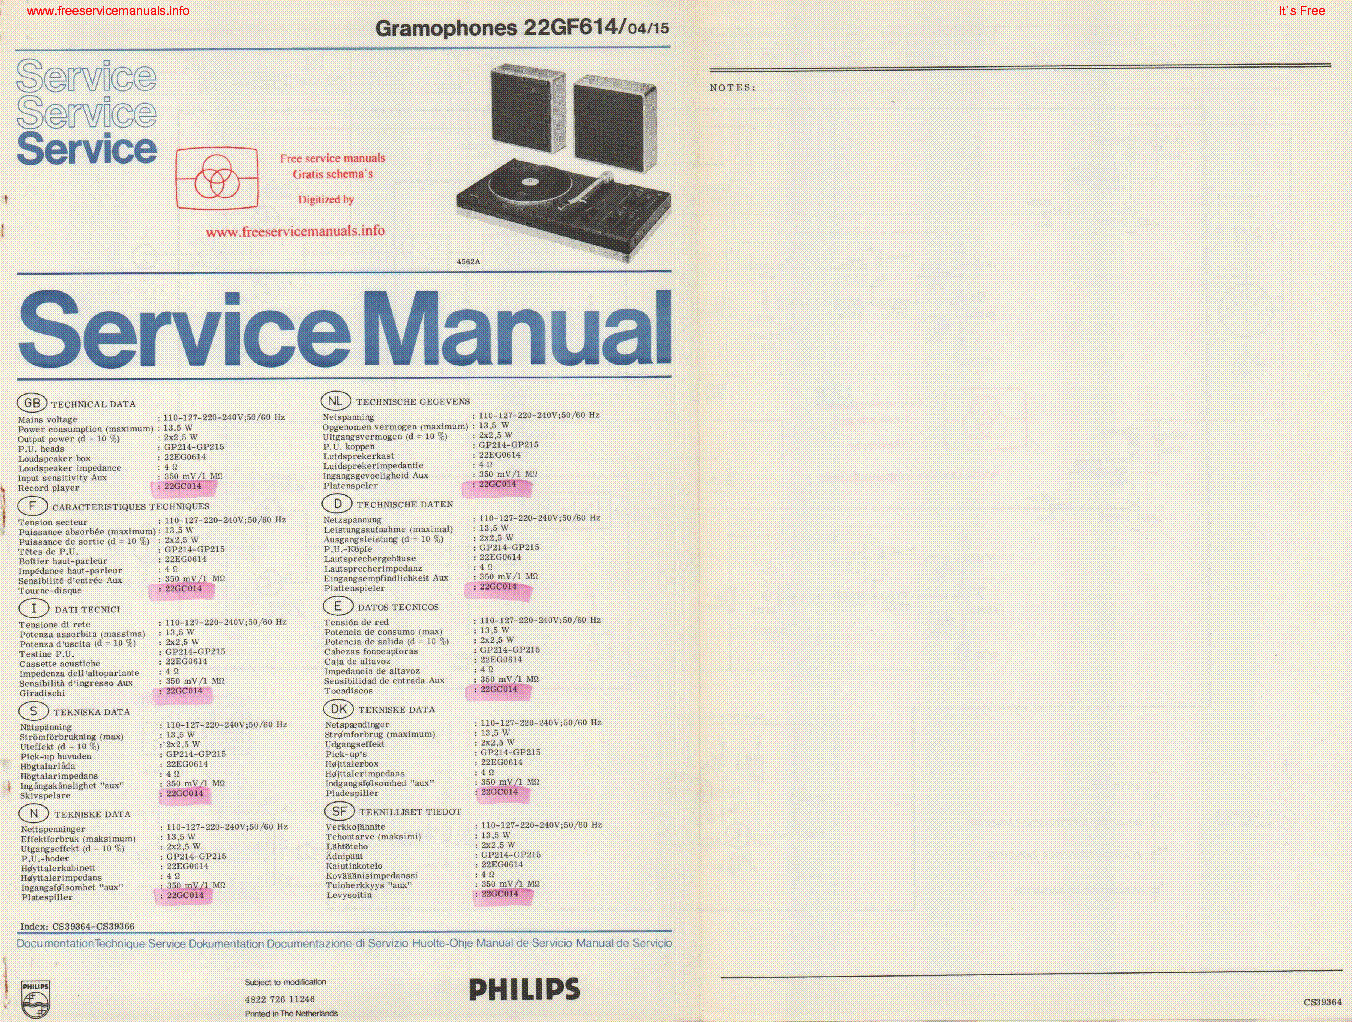 PHILIPS 22GF614 04 15 service manual (1st page)